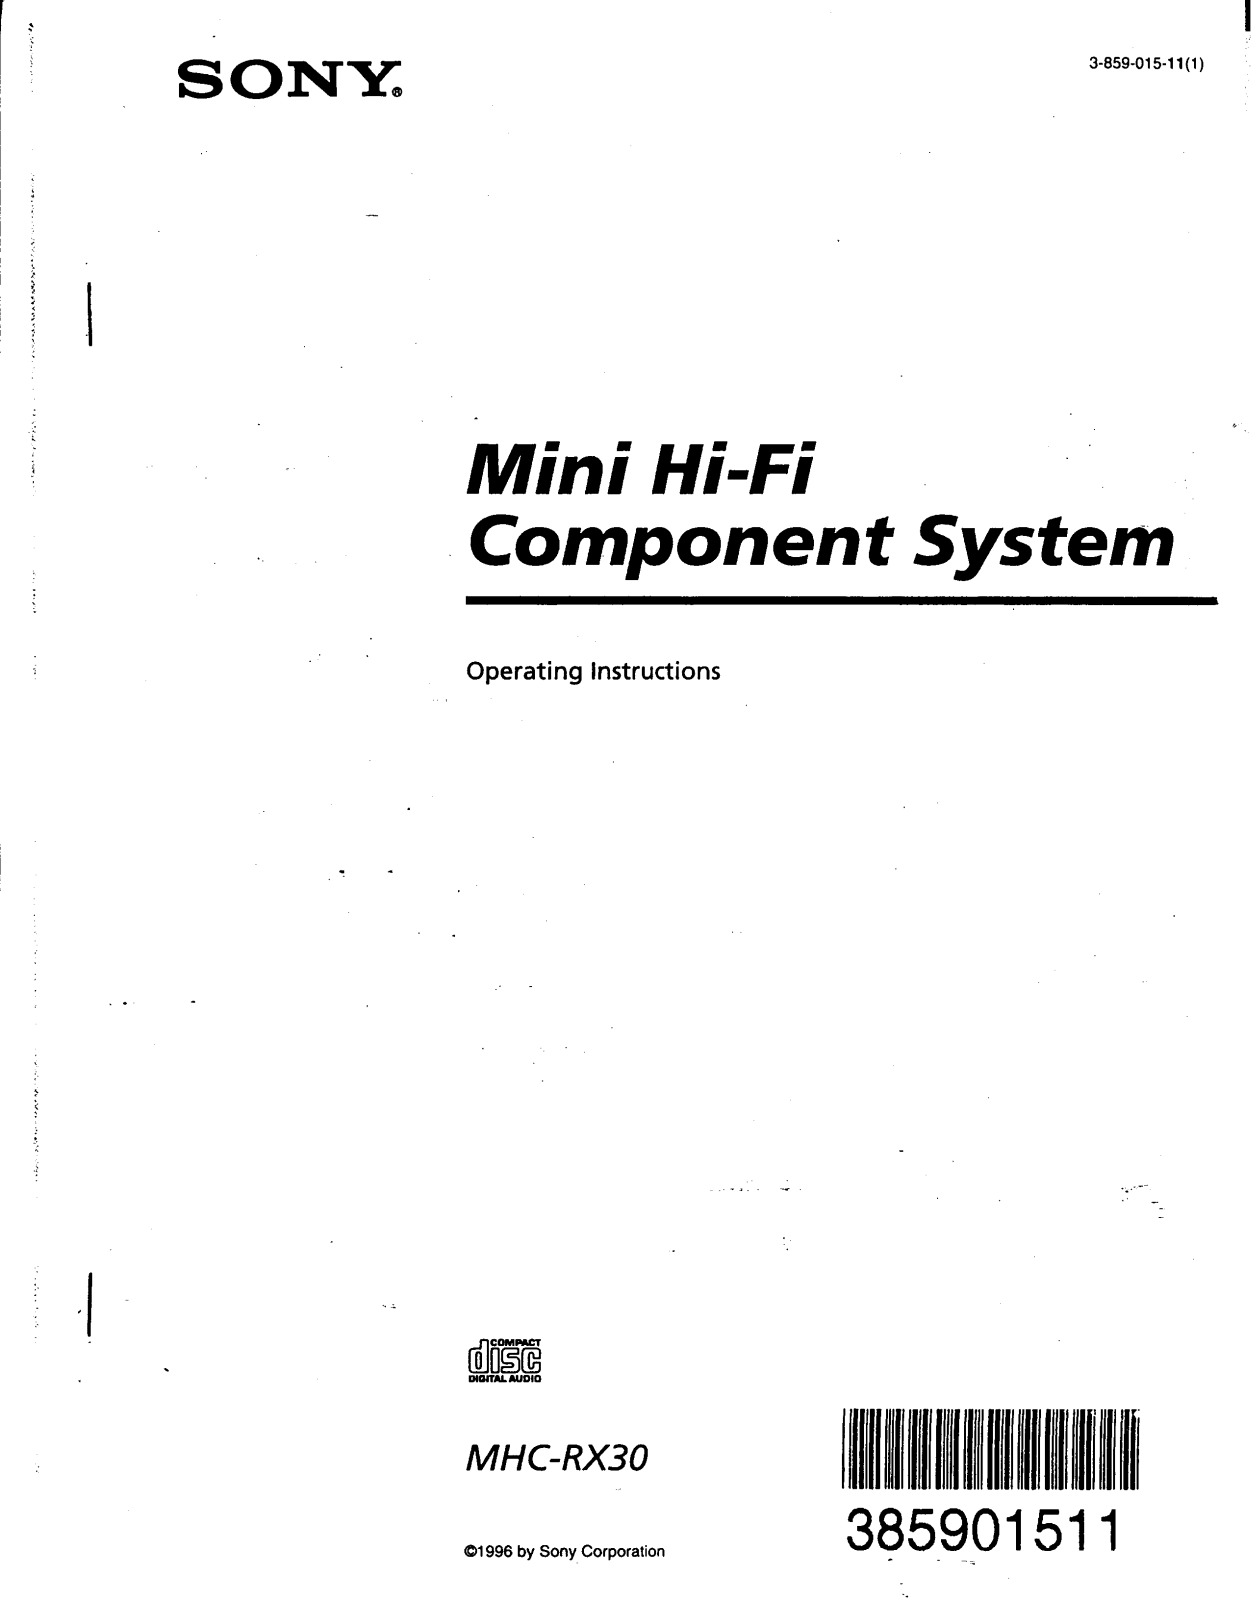 Sony MHC-RX30 Operating Manual